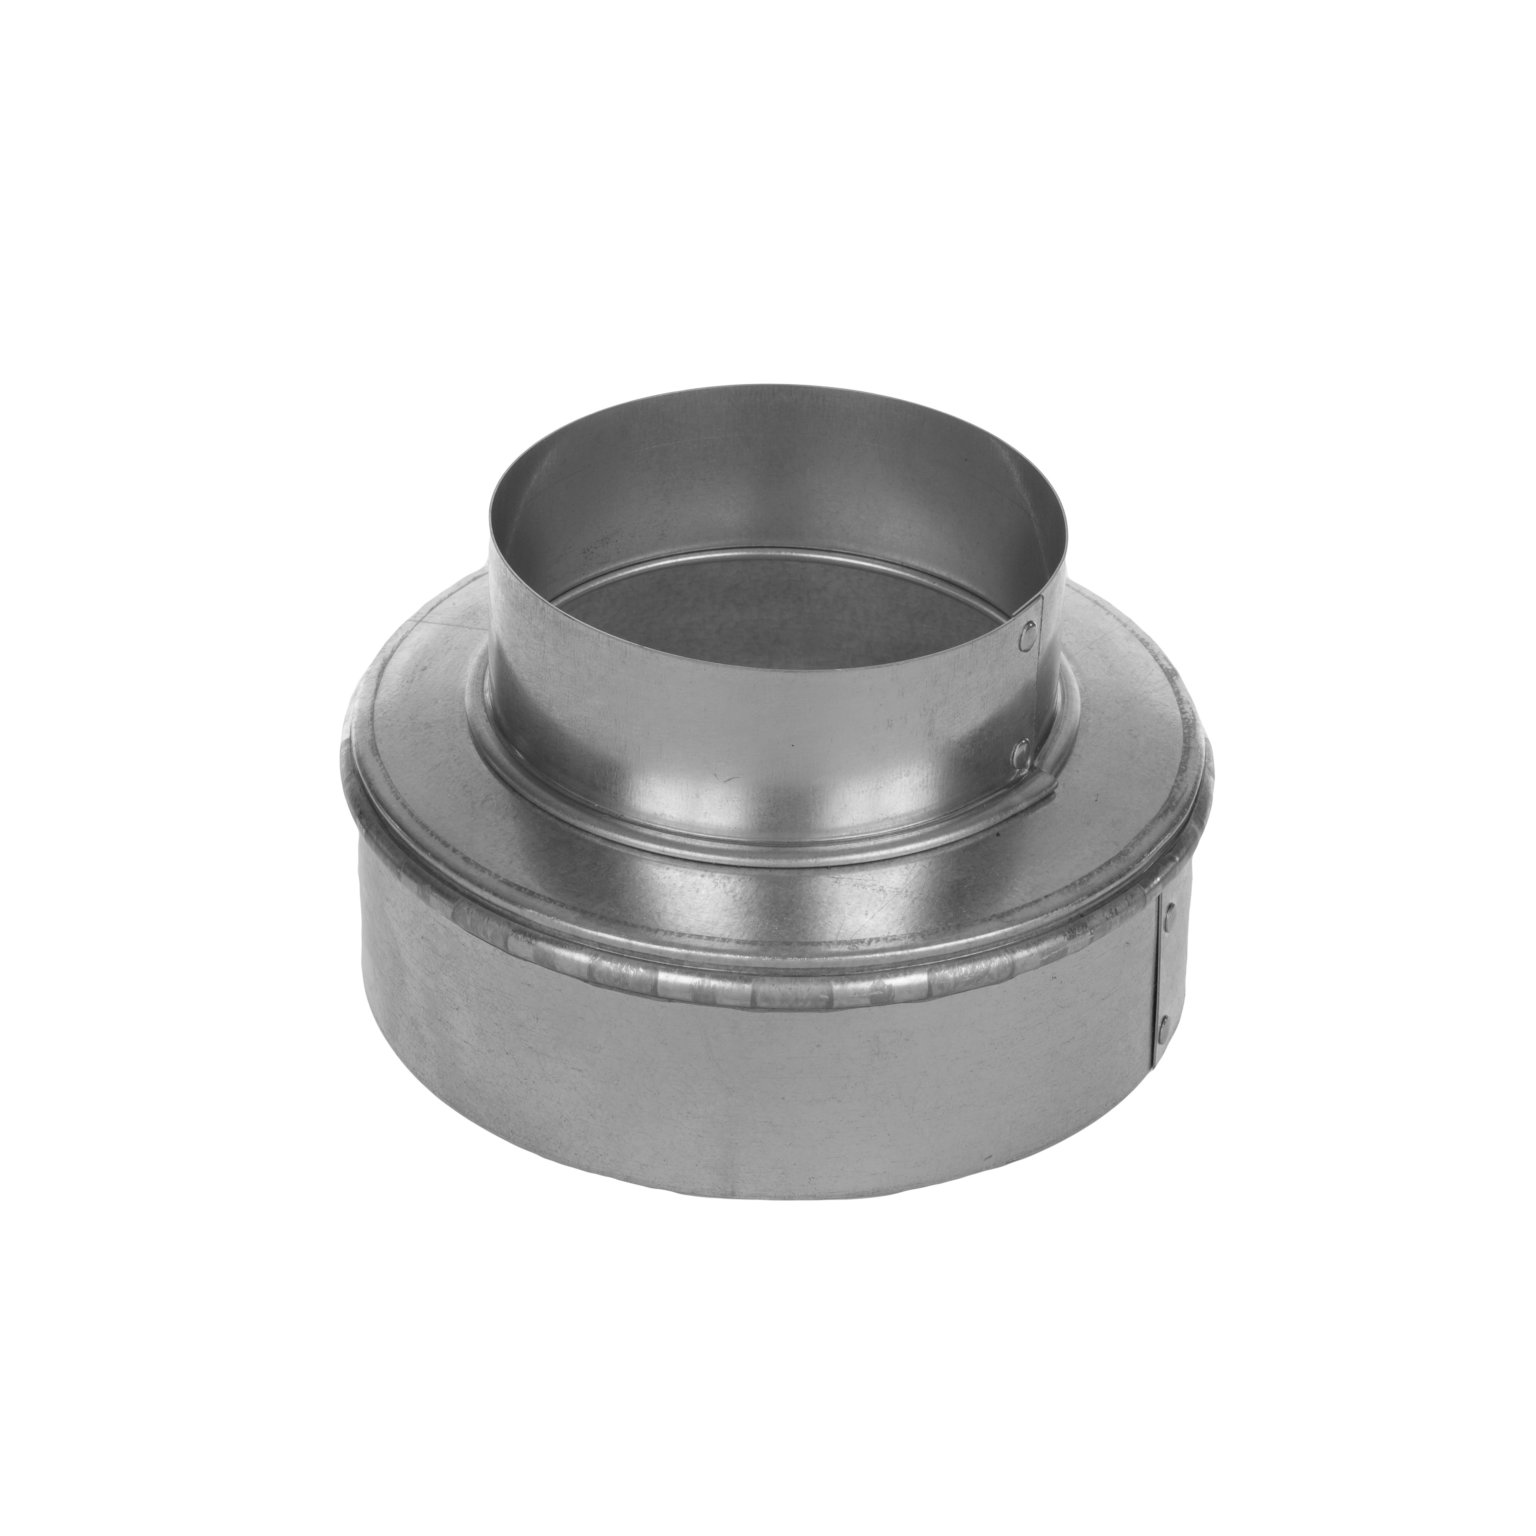 Increaser for Duct Other purpose. Single Wall Metal Reducer 